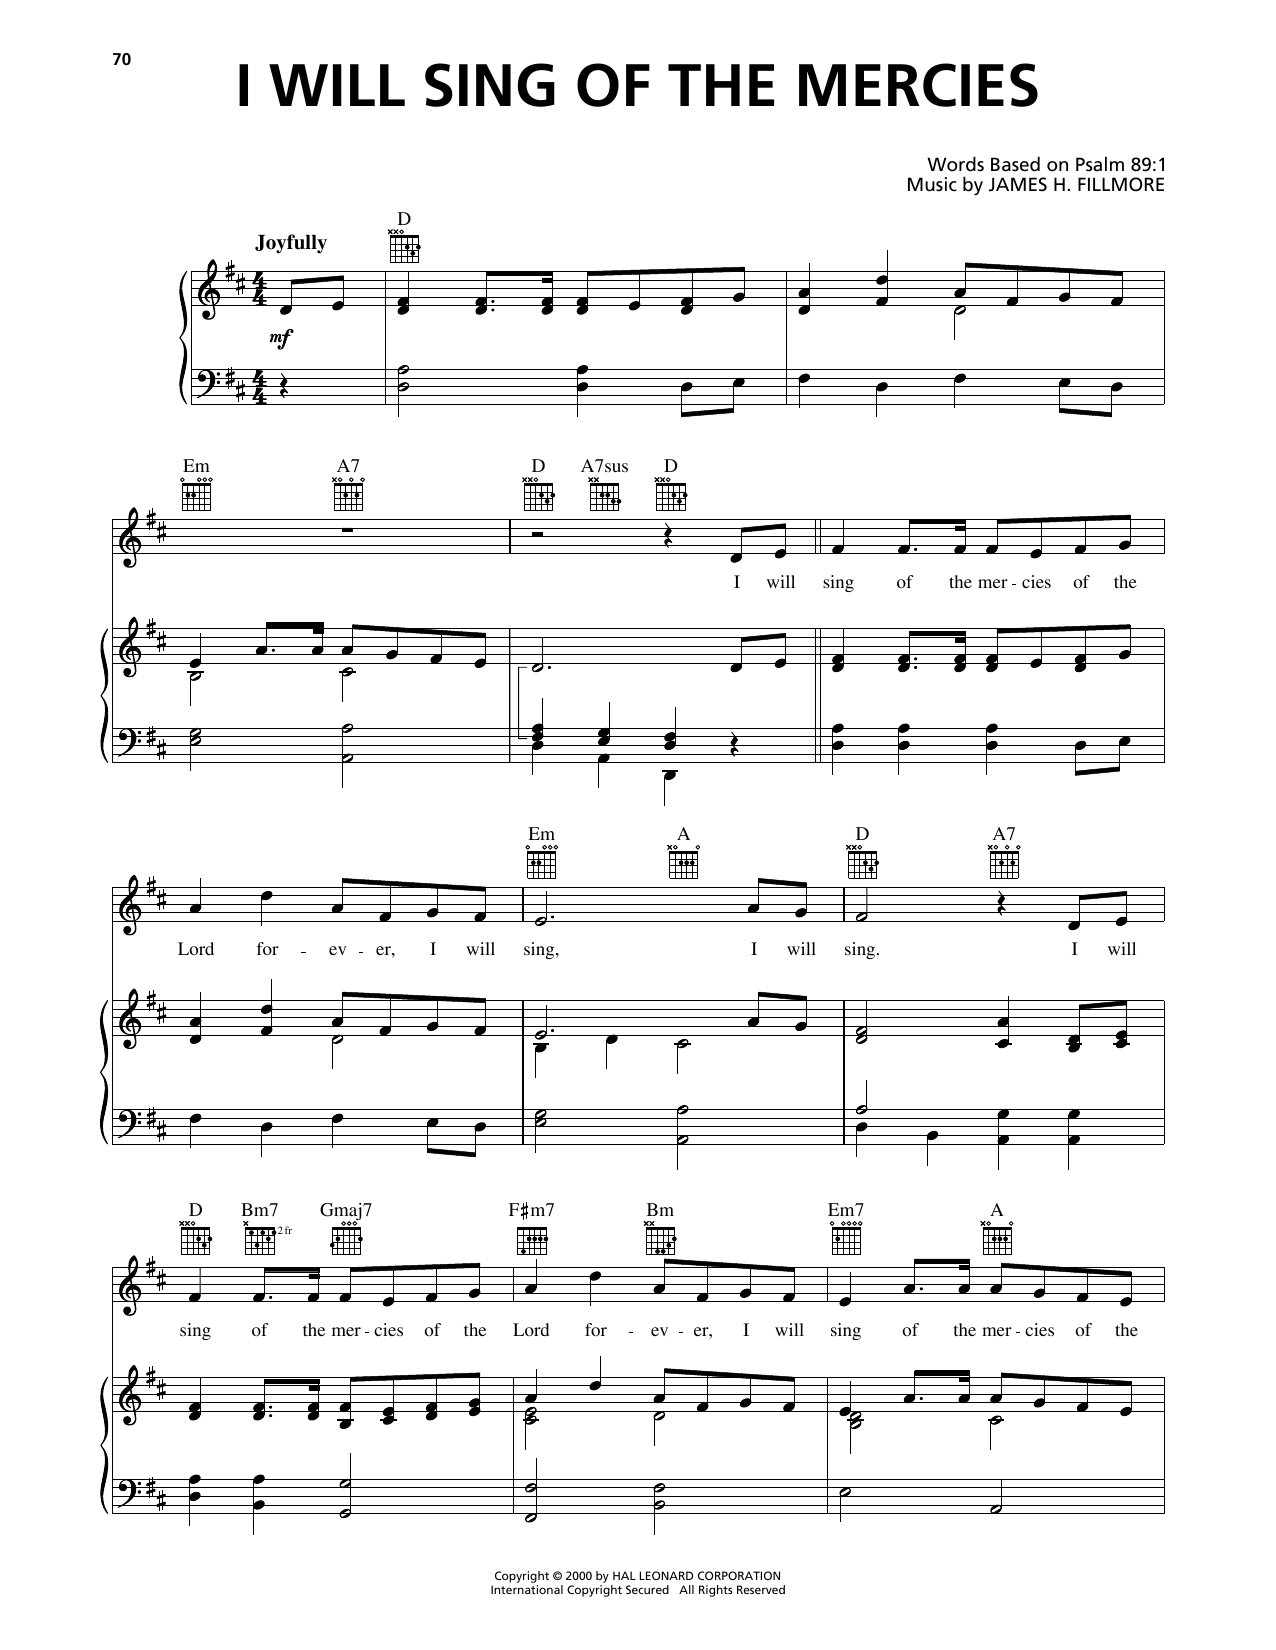 Download James H. Fillmore I Will Sing Of The Mercies Sheet Music